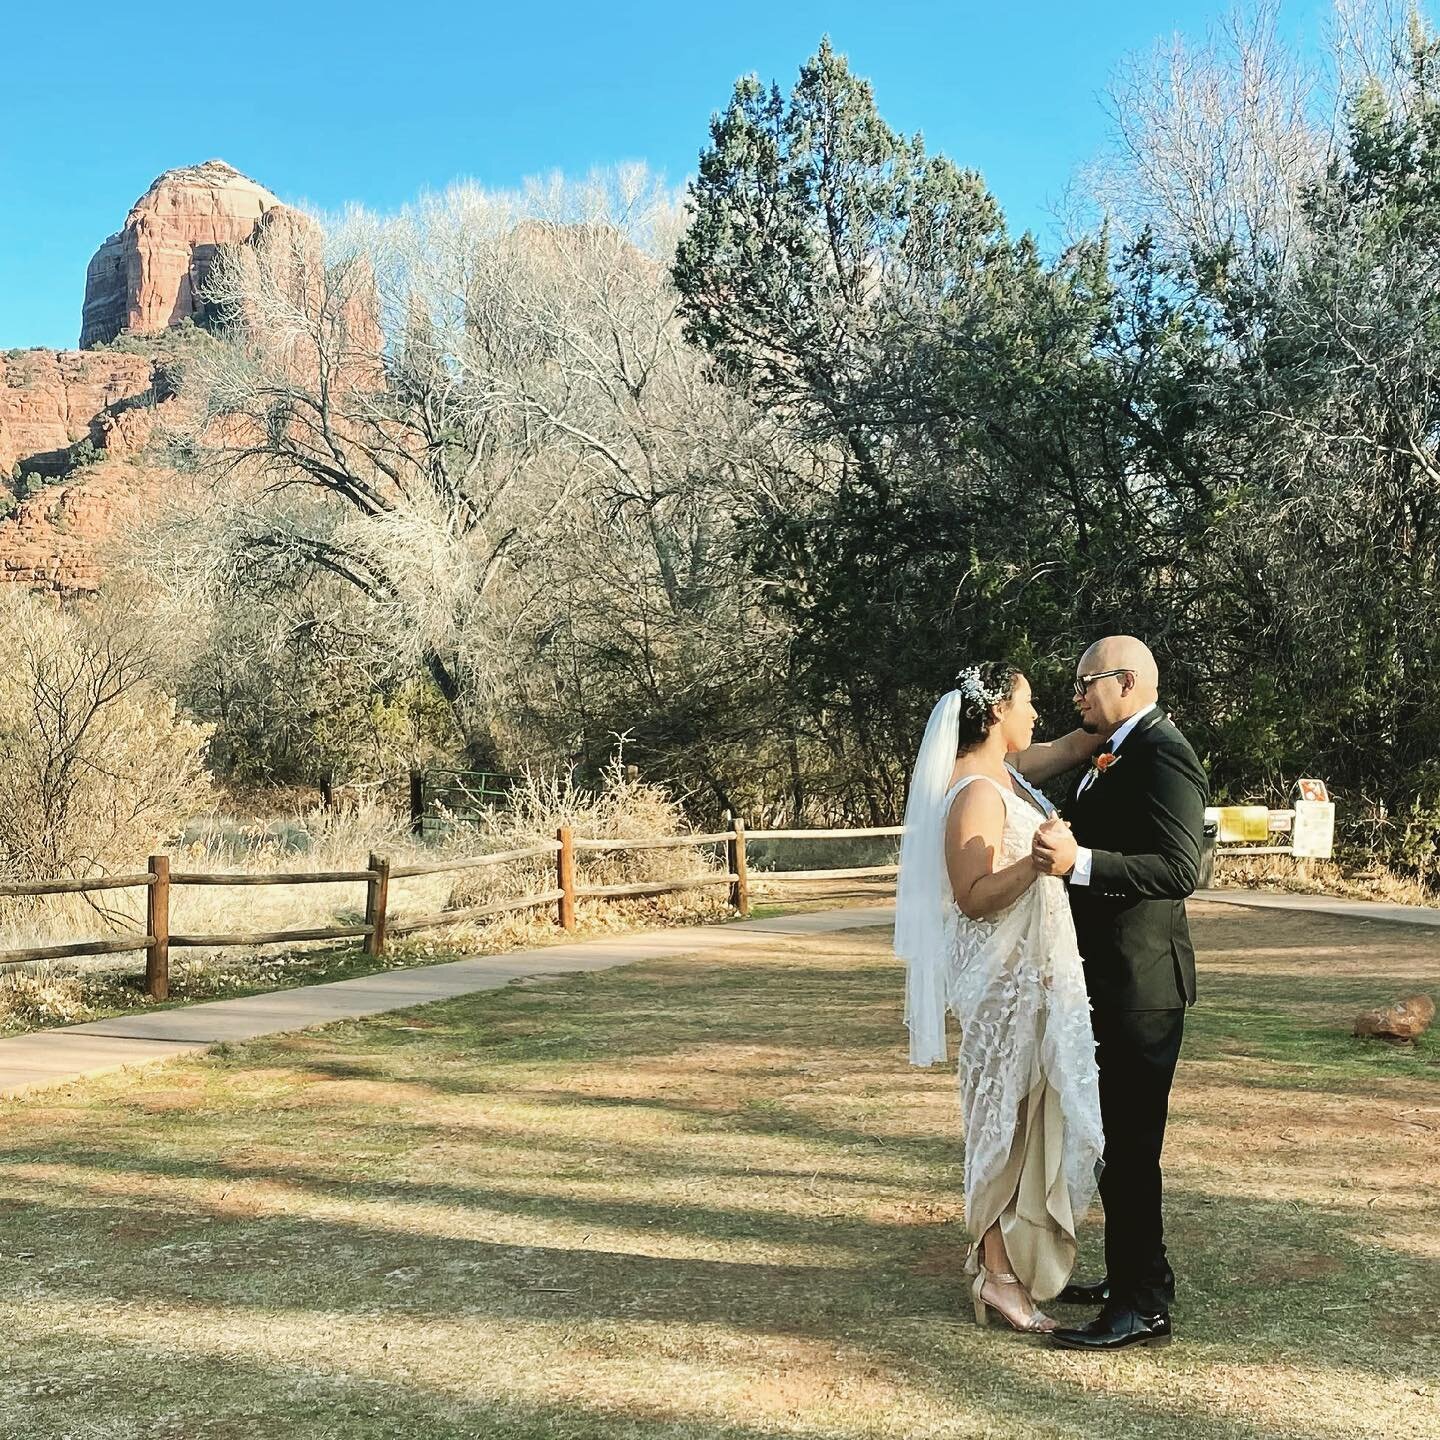 One of our favorite locations, Crescent Moon offers meadows and creekside areas for your wedding. You can also rent the Ramada to ensure a covered space where your guests can sit, and where you can celebrate after your ceremony. #crescentmoonwedding 